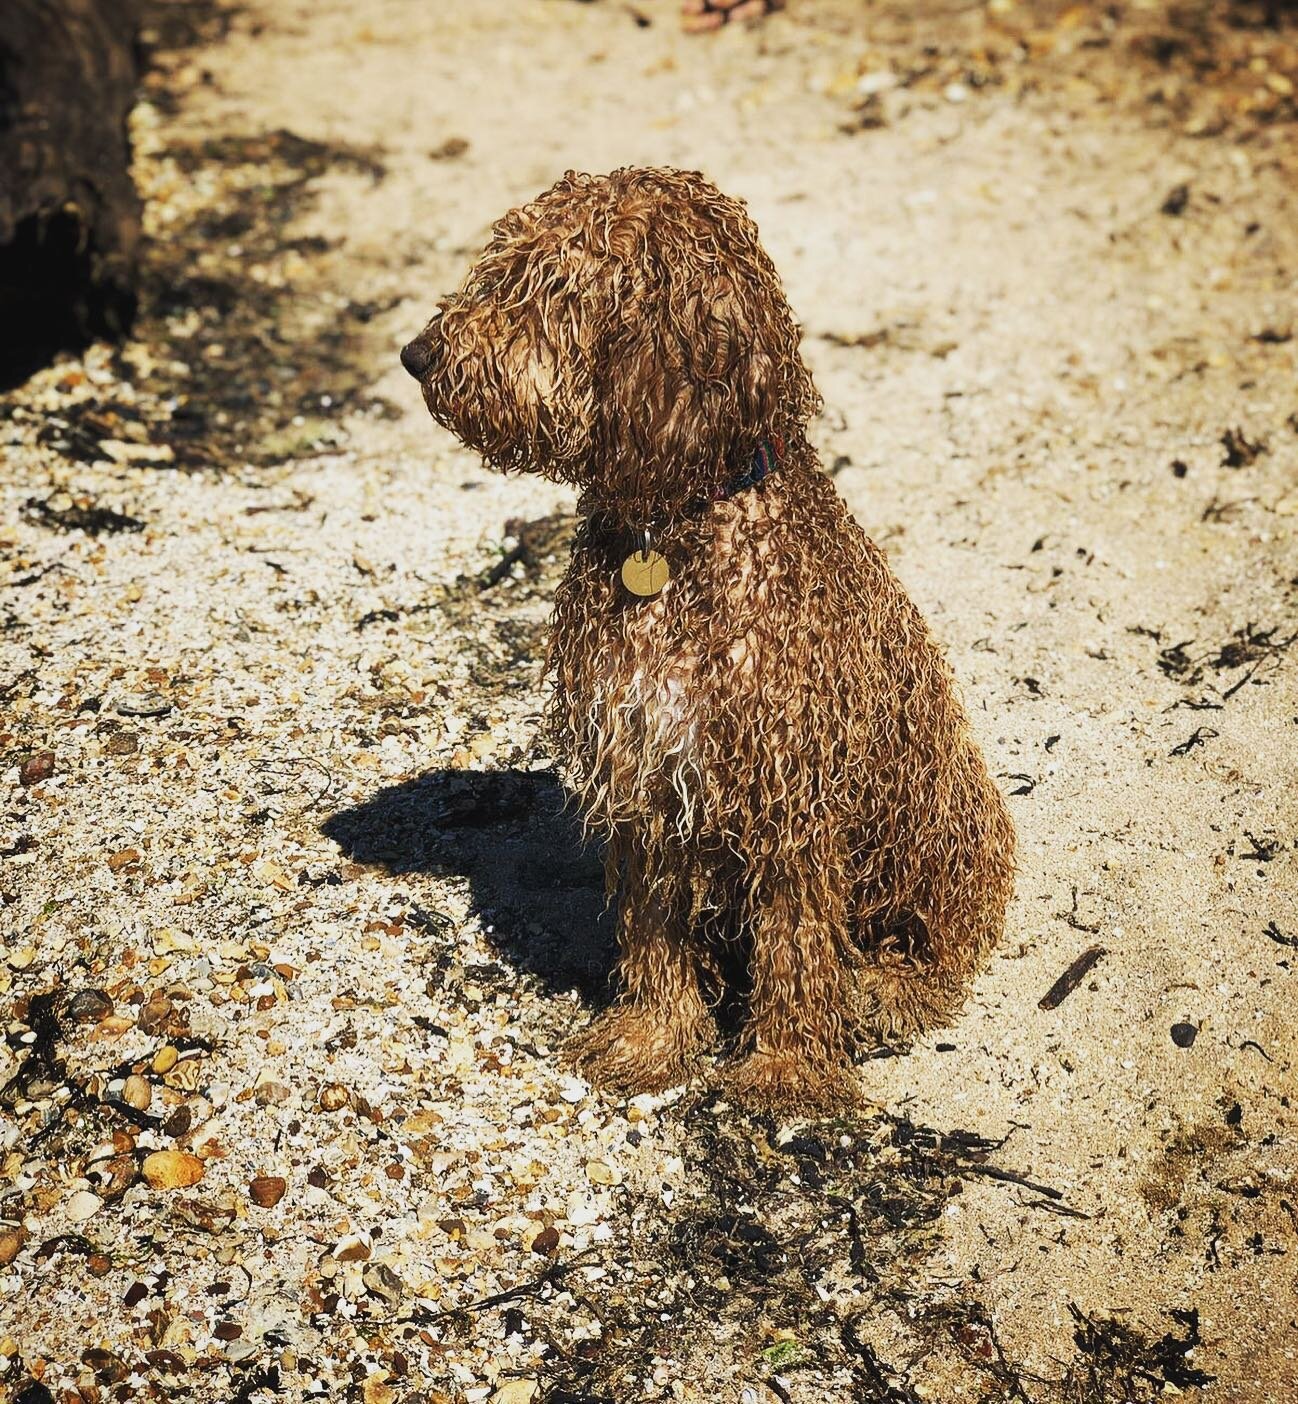 Onion has found a way to keep cool today. Two showers later, he&rsquo;s now ready for a good night sleep. What a day! 🐶 🚿 ⭐️ #dogsonthebeach #wetdog #fundog #cleverdog #teamworkmakesthedreamwork #whatatreat #dogsofinstagram #beach #beachlife #sunme